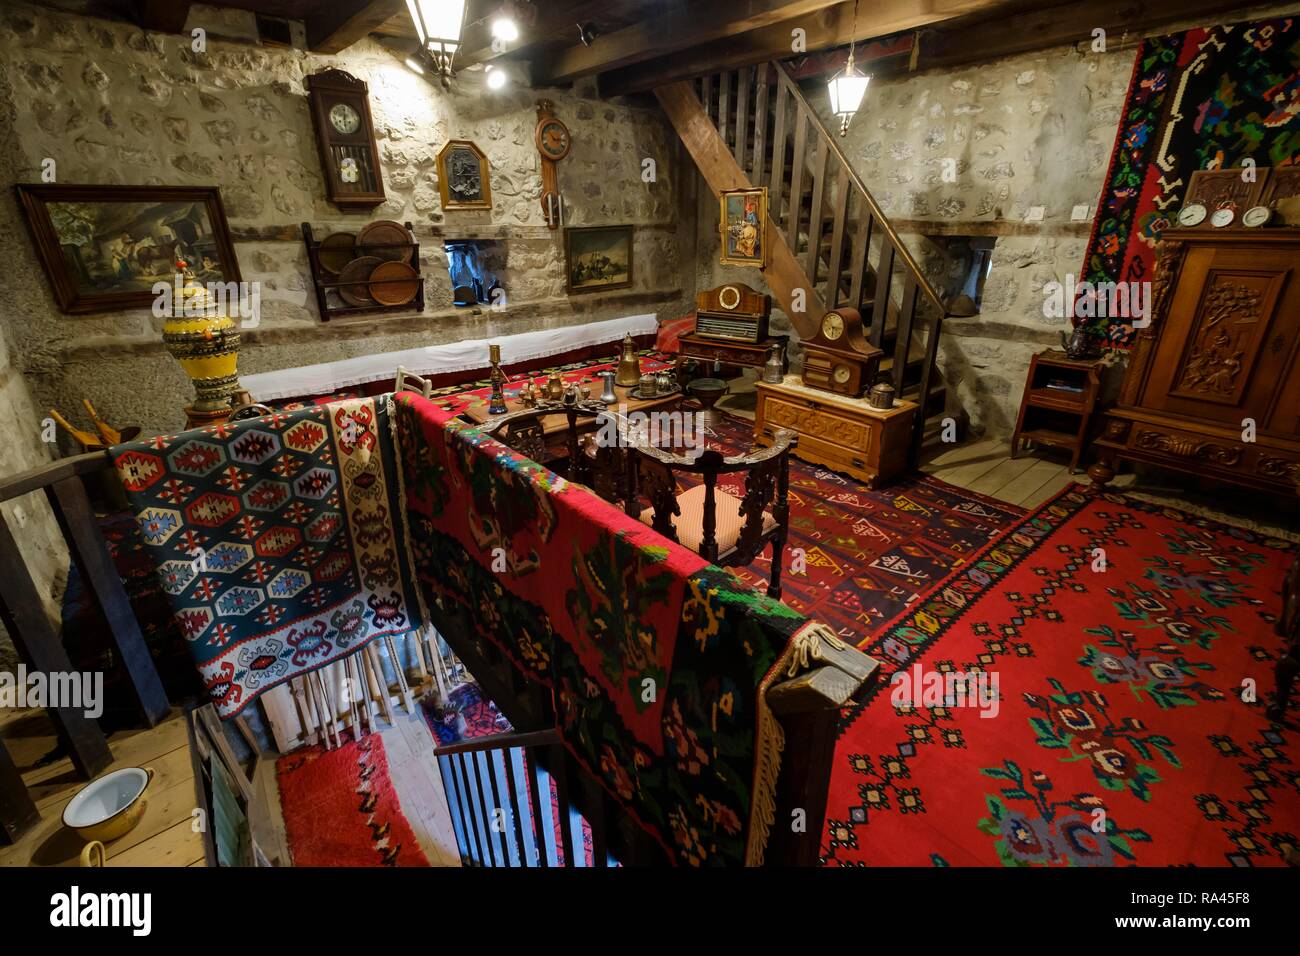 Living space in the fortified defence tower, Redzepagic defence tower, Kula Redzepagica, Plav, Montenegro Stock Photo